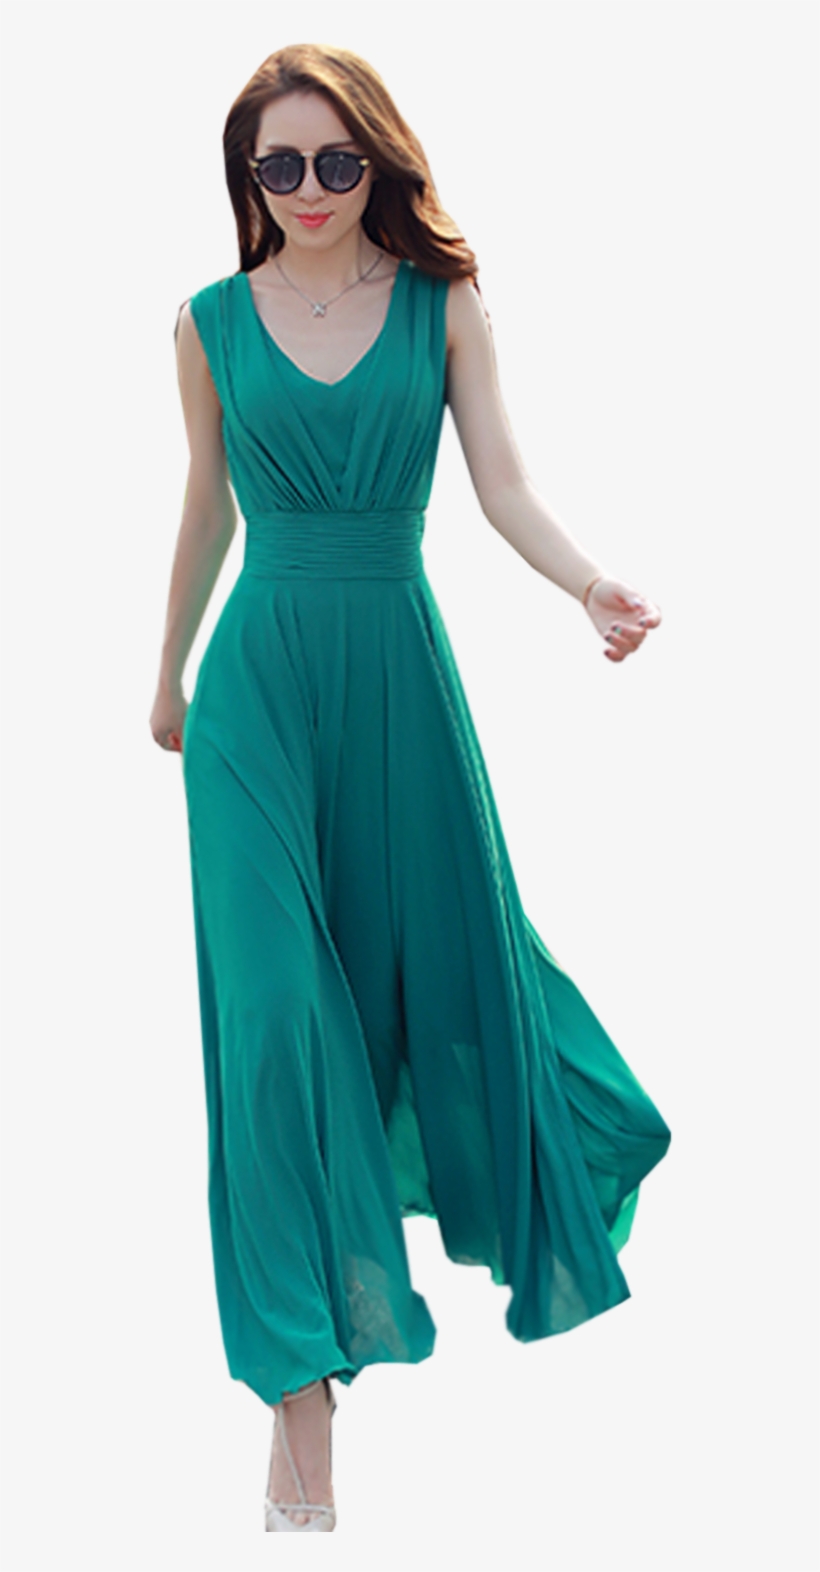 Home Woman Dresses - Gown, transparent png #9193917